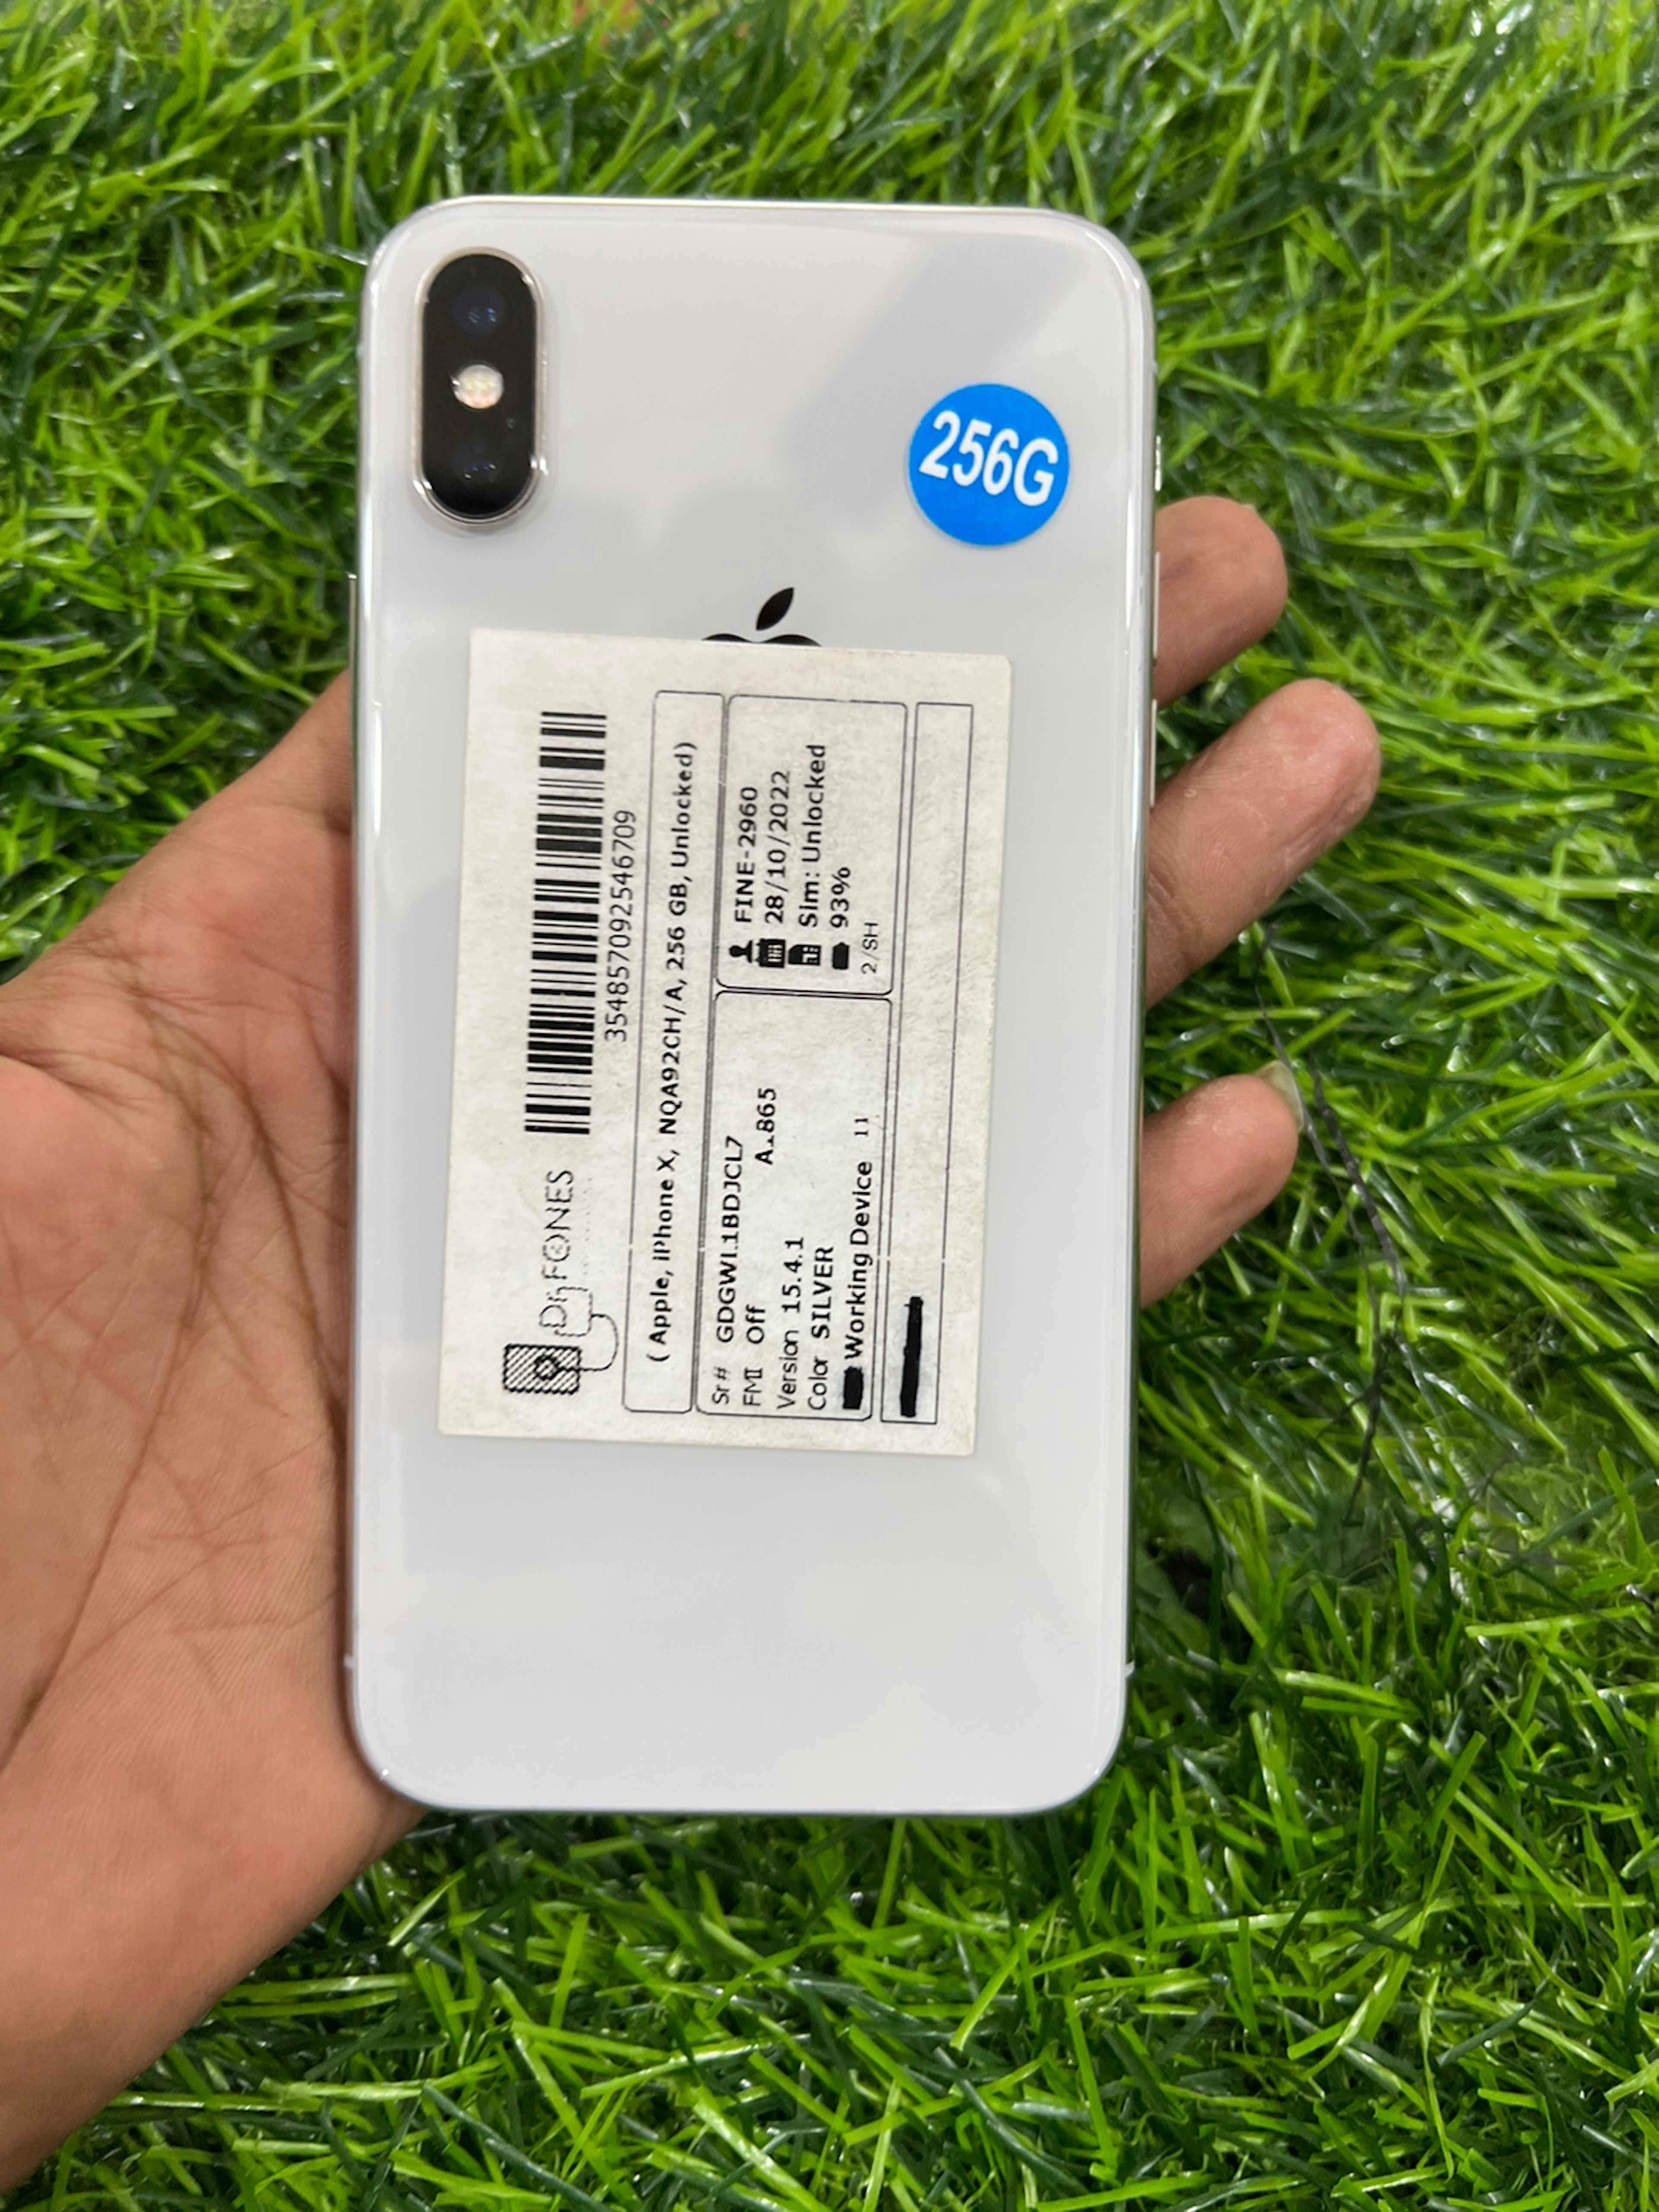 View - I phone x photos, I phone x available in Ahmedabad, make deal in 22990